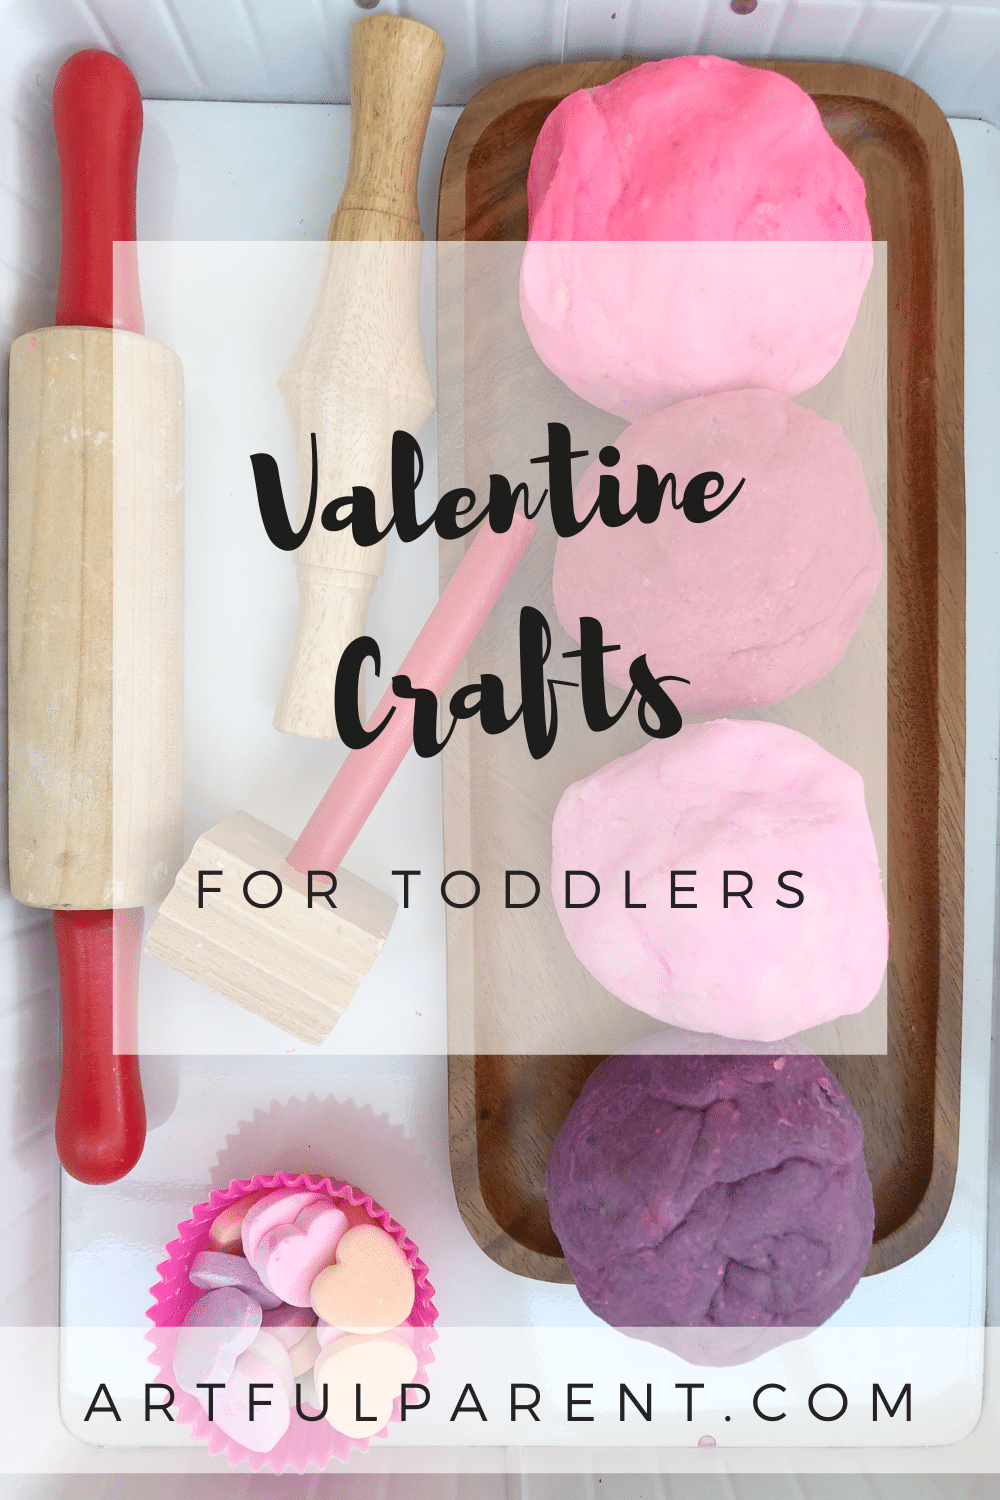 11 Easy Valentine Crafts for Toddlers